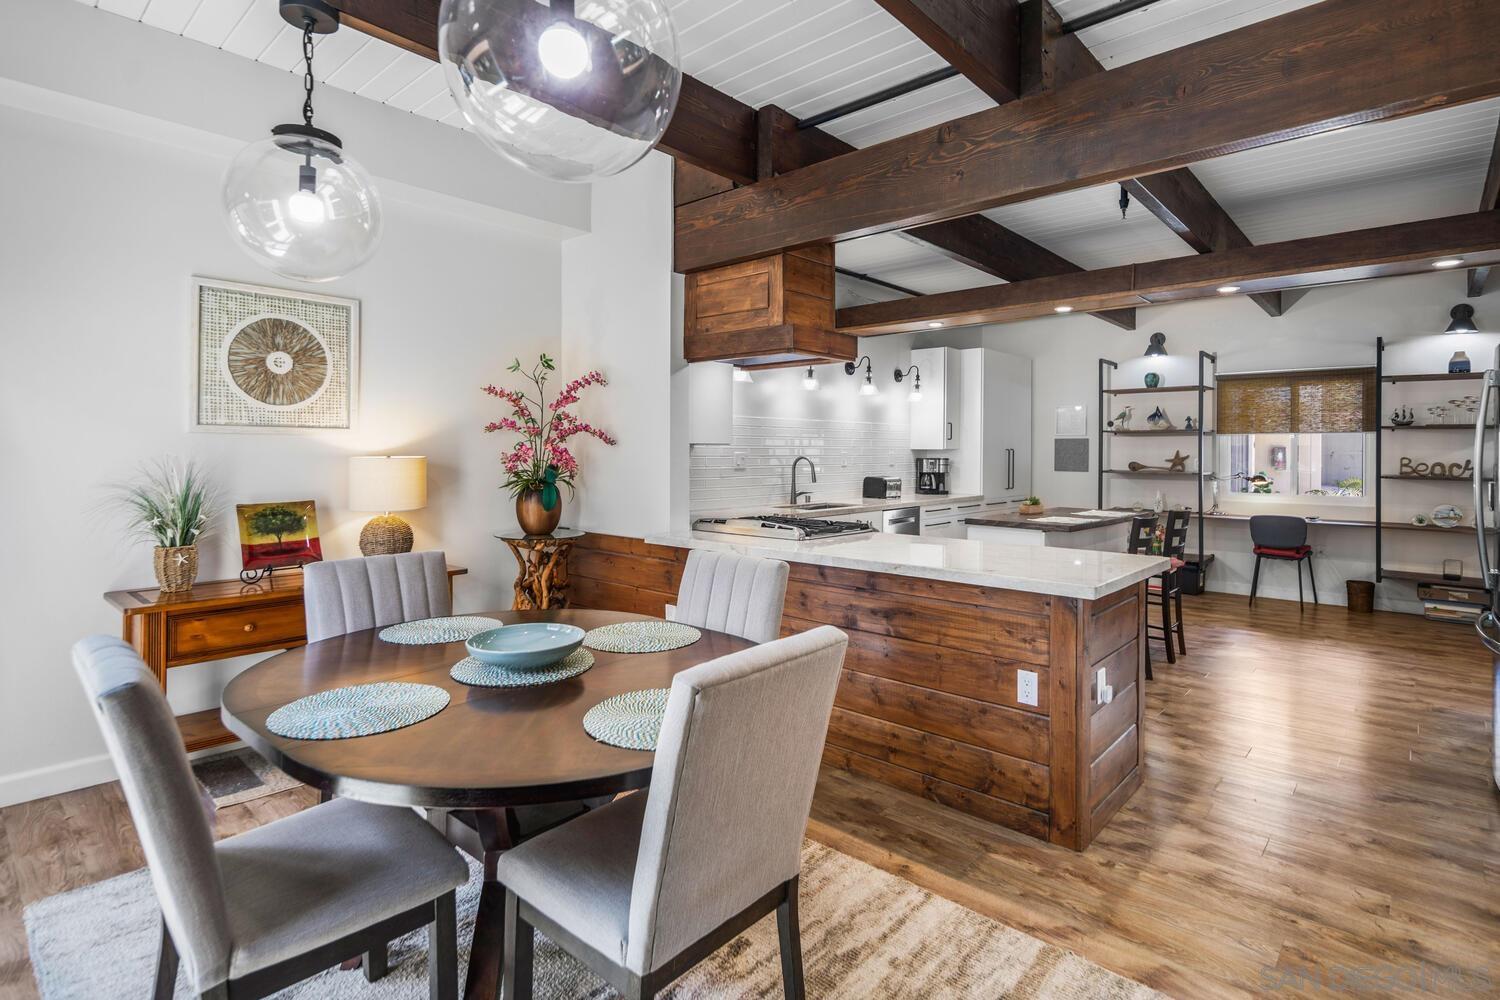 a dining room with stainless steel appliances kitchen island granite countertop a table chairs and a stove